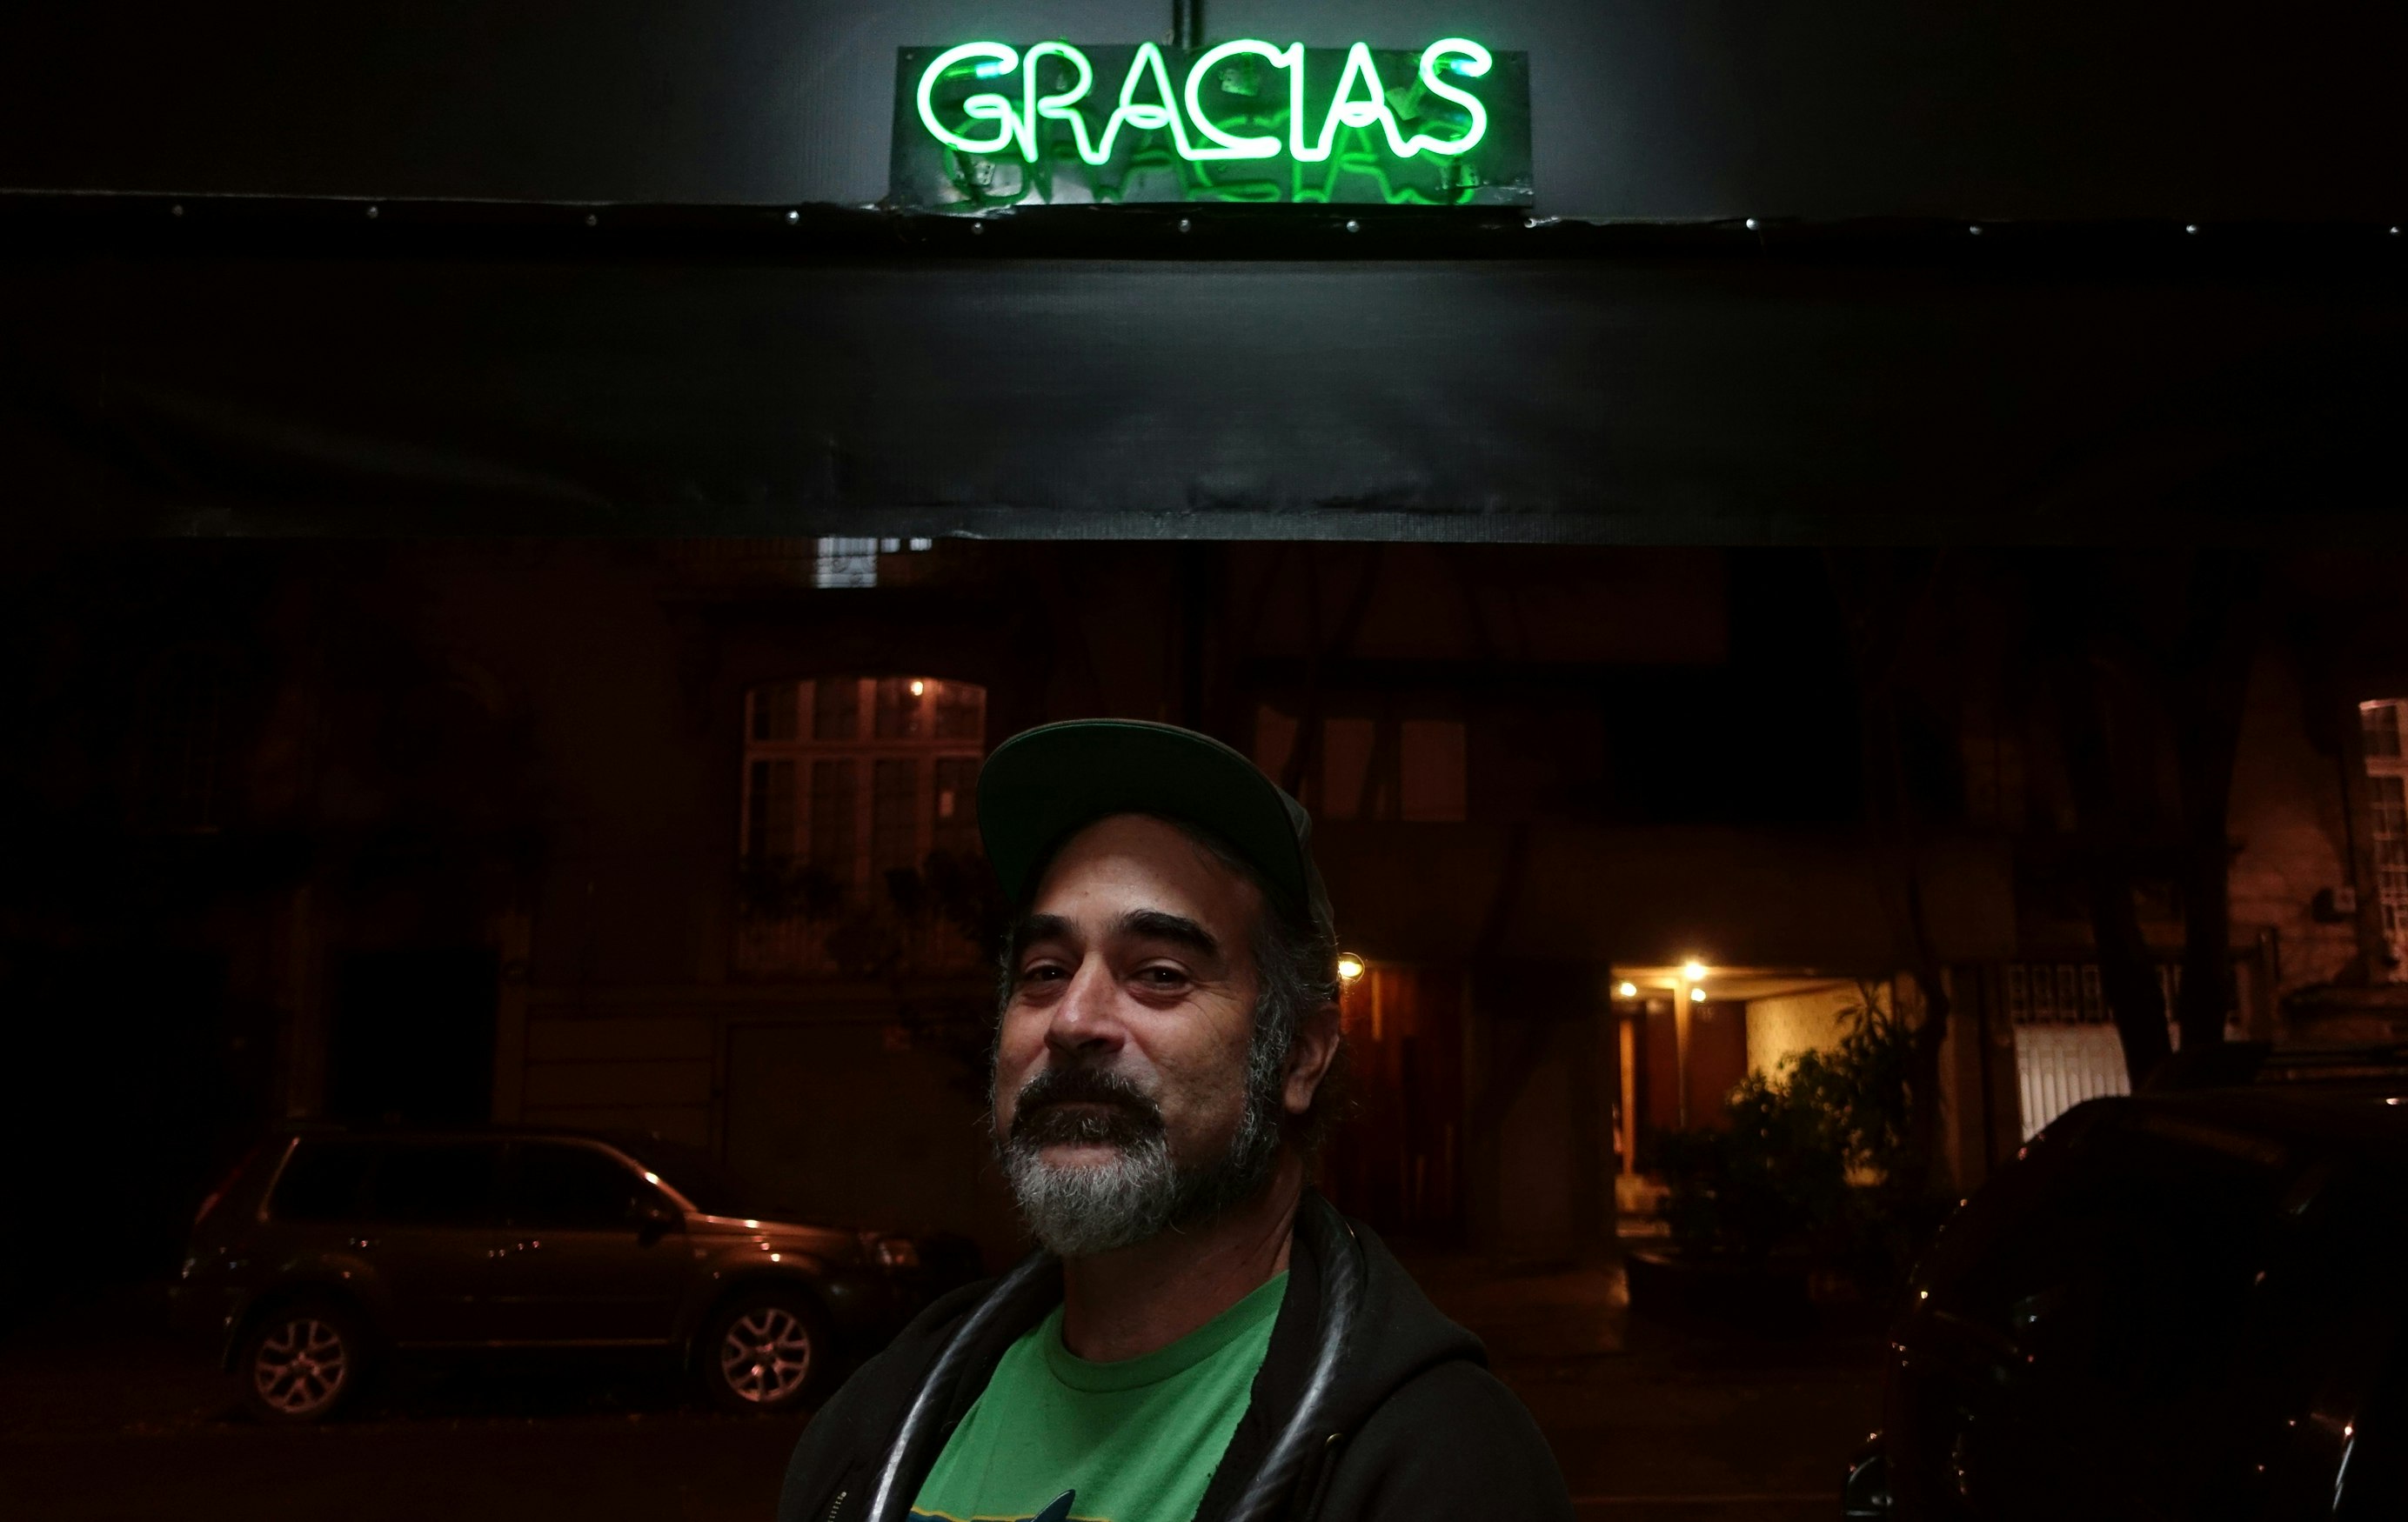 A man wearing a dark baseball hat, green t-shirt and black sweatshirt stands under a neon sign that says "Gracias".